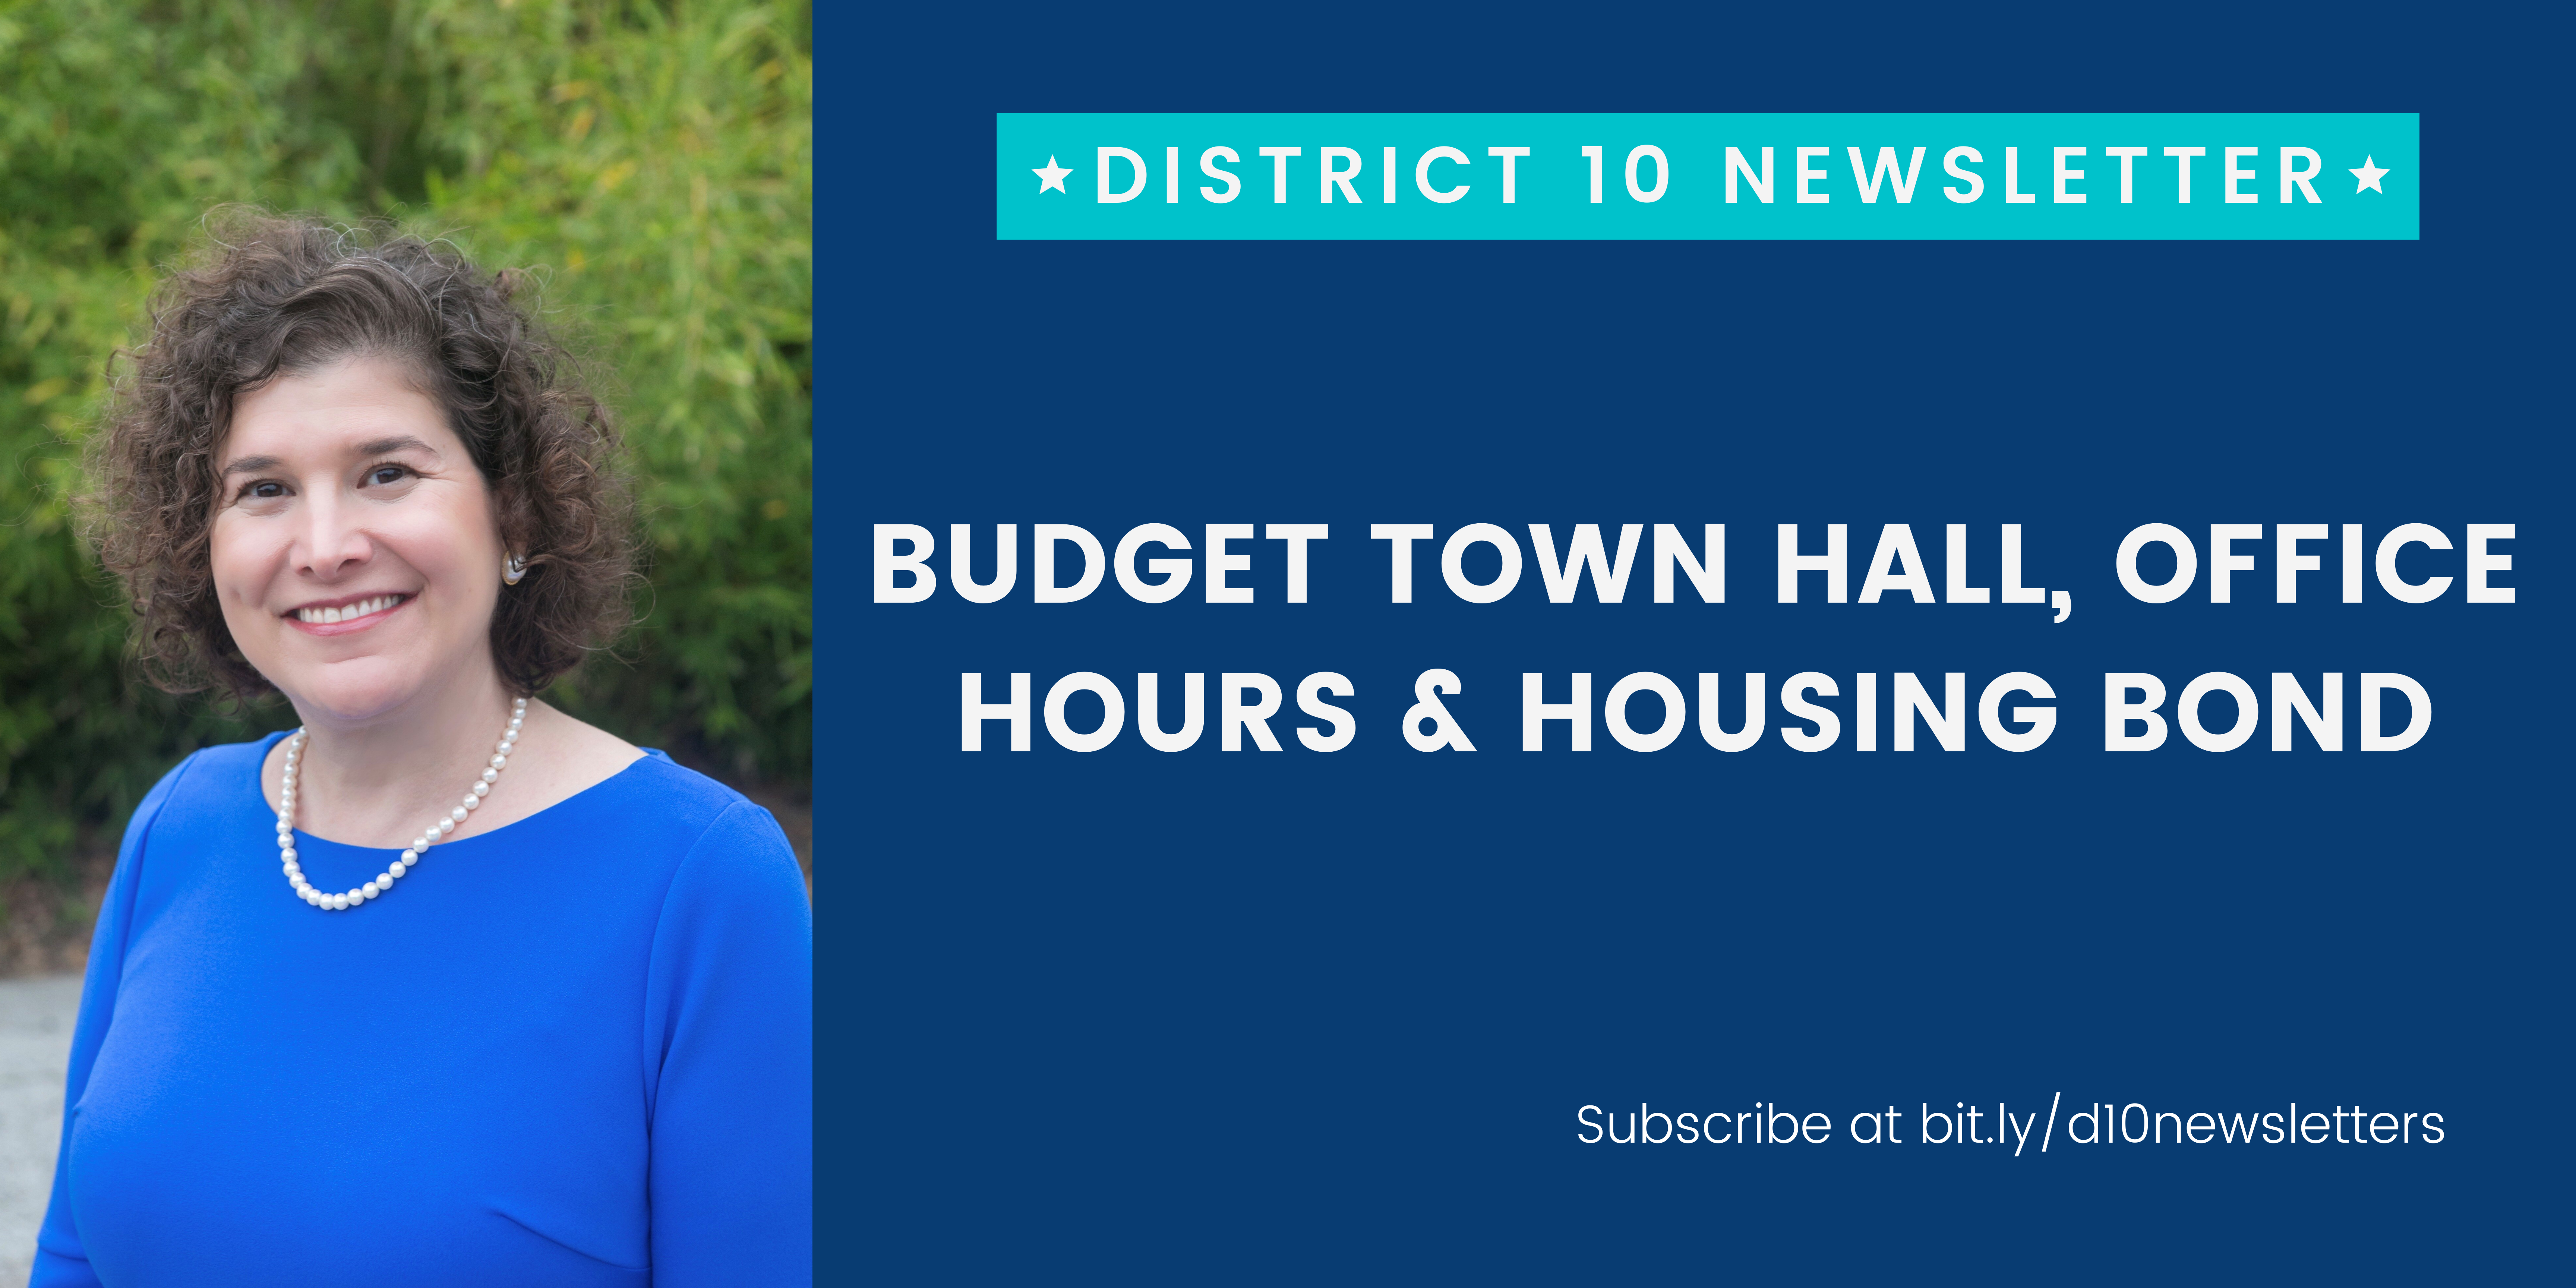 Budget Town Hall, Office Hours, and Housing Bond